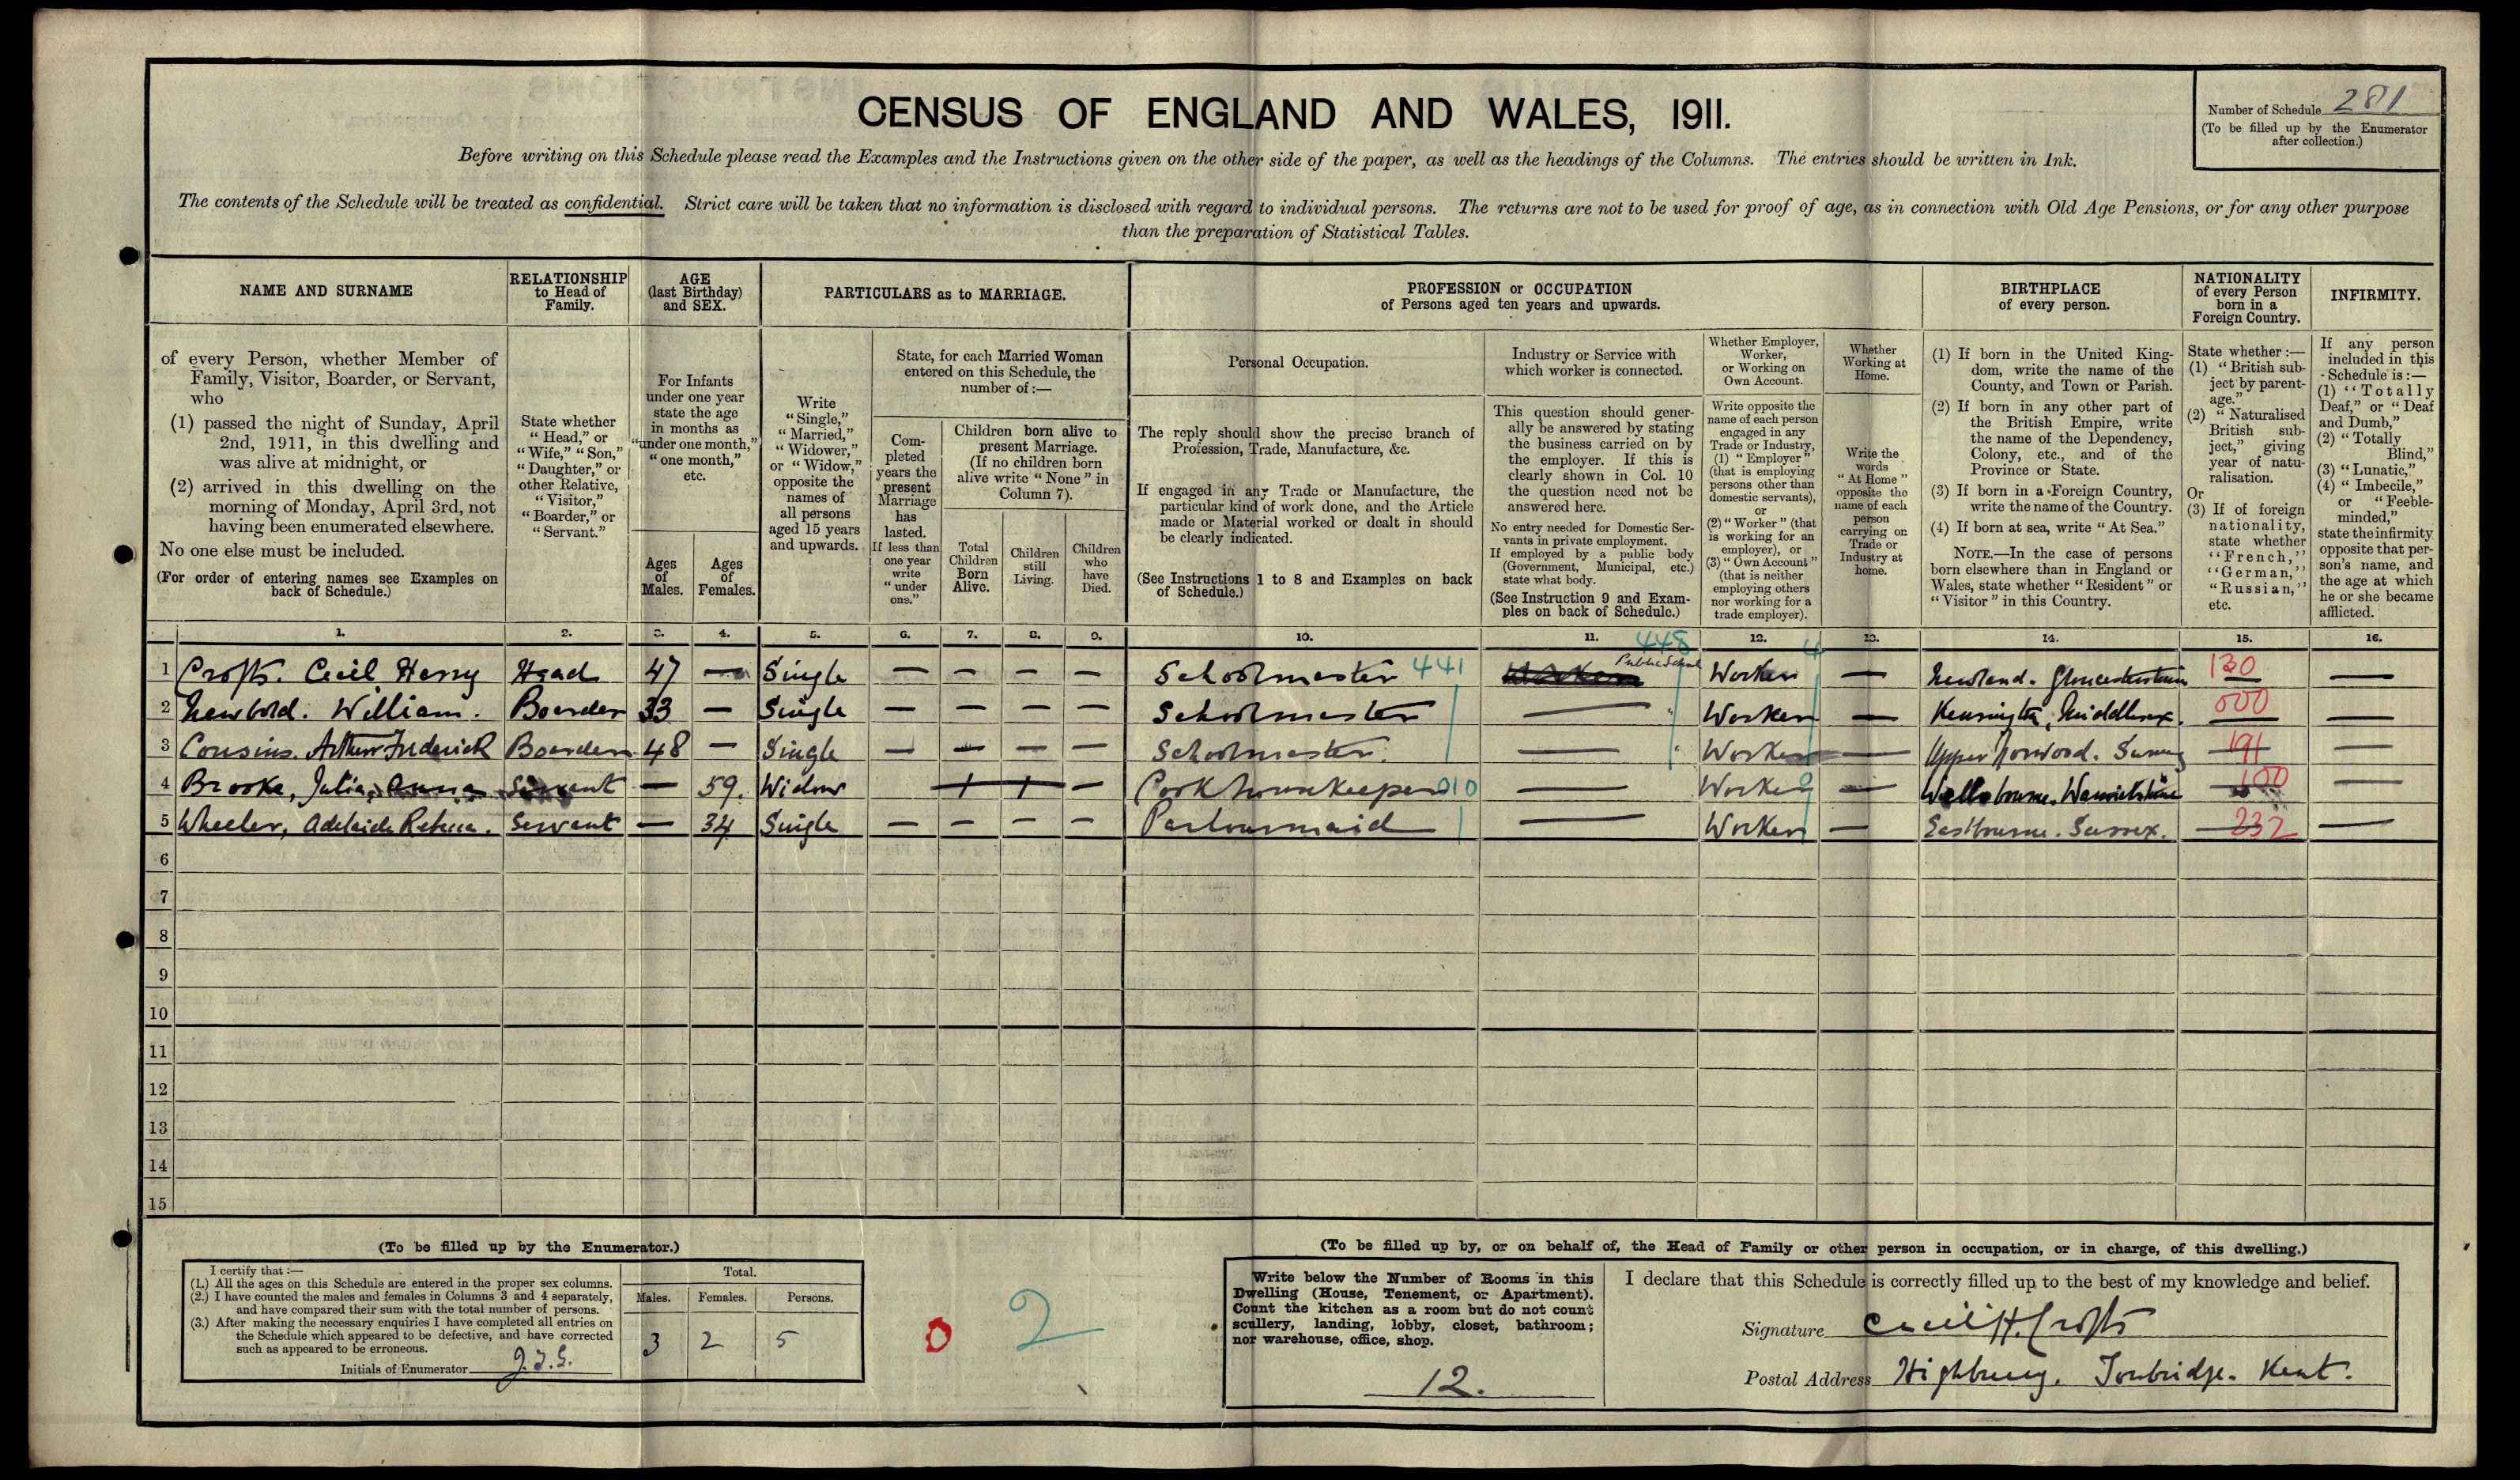 Harry Cecil Crofts on the 1911 census